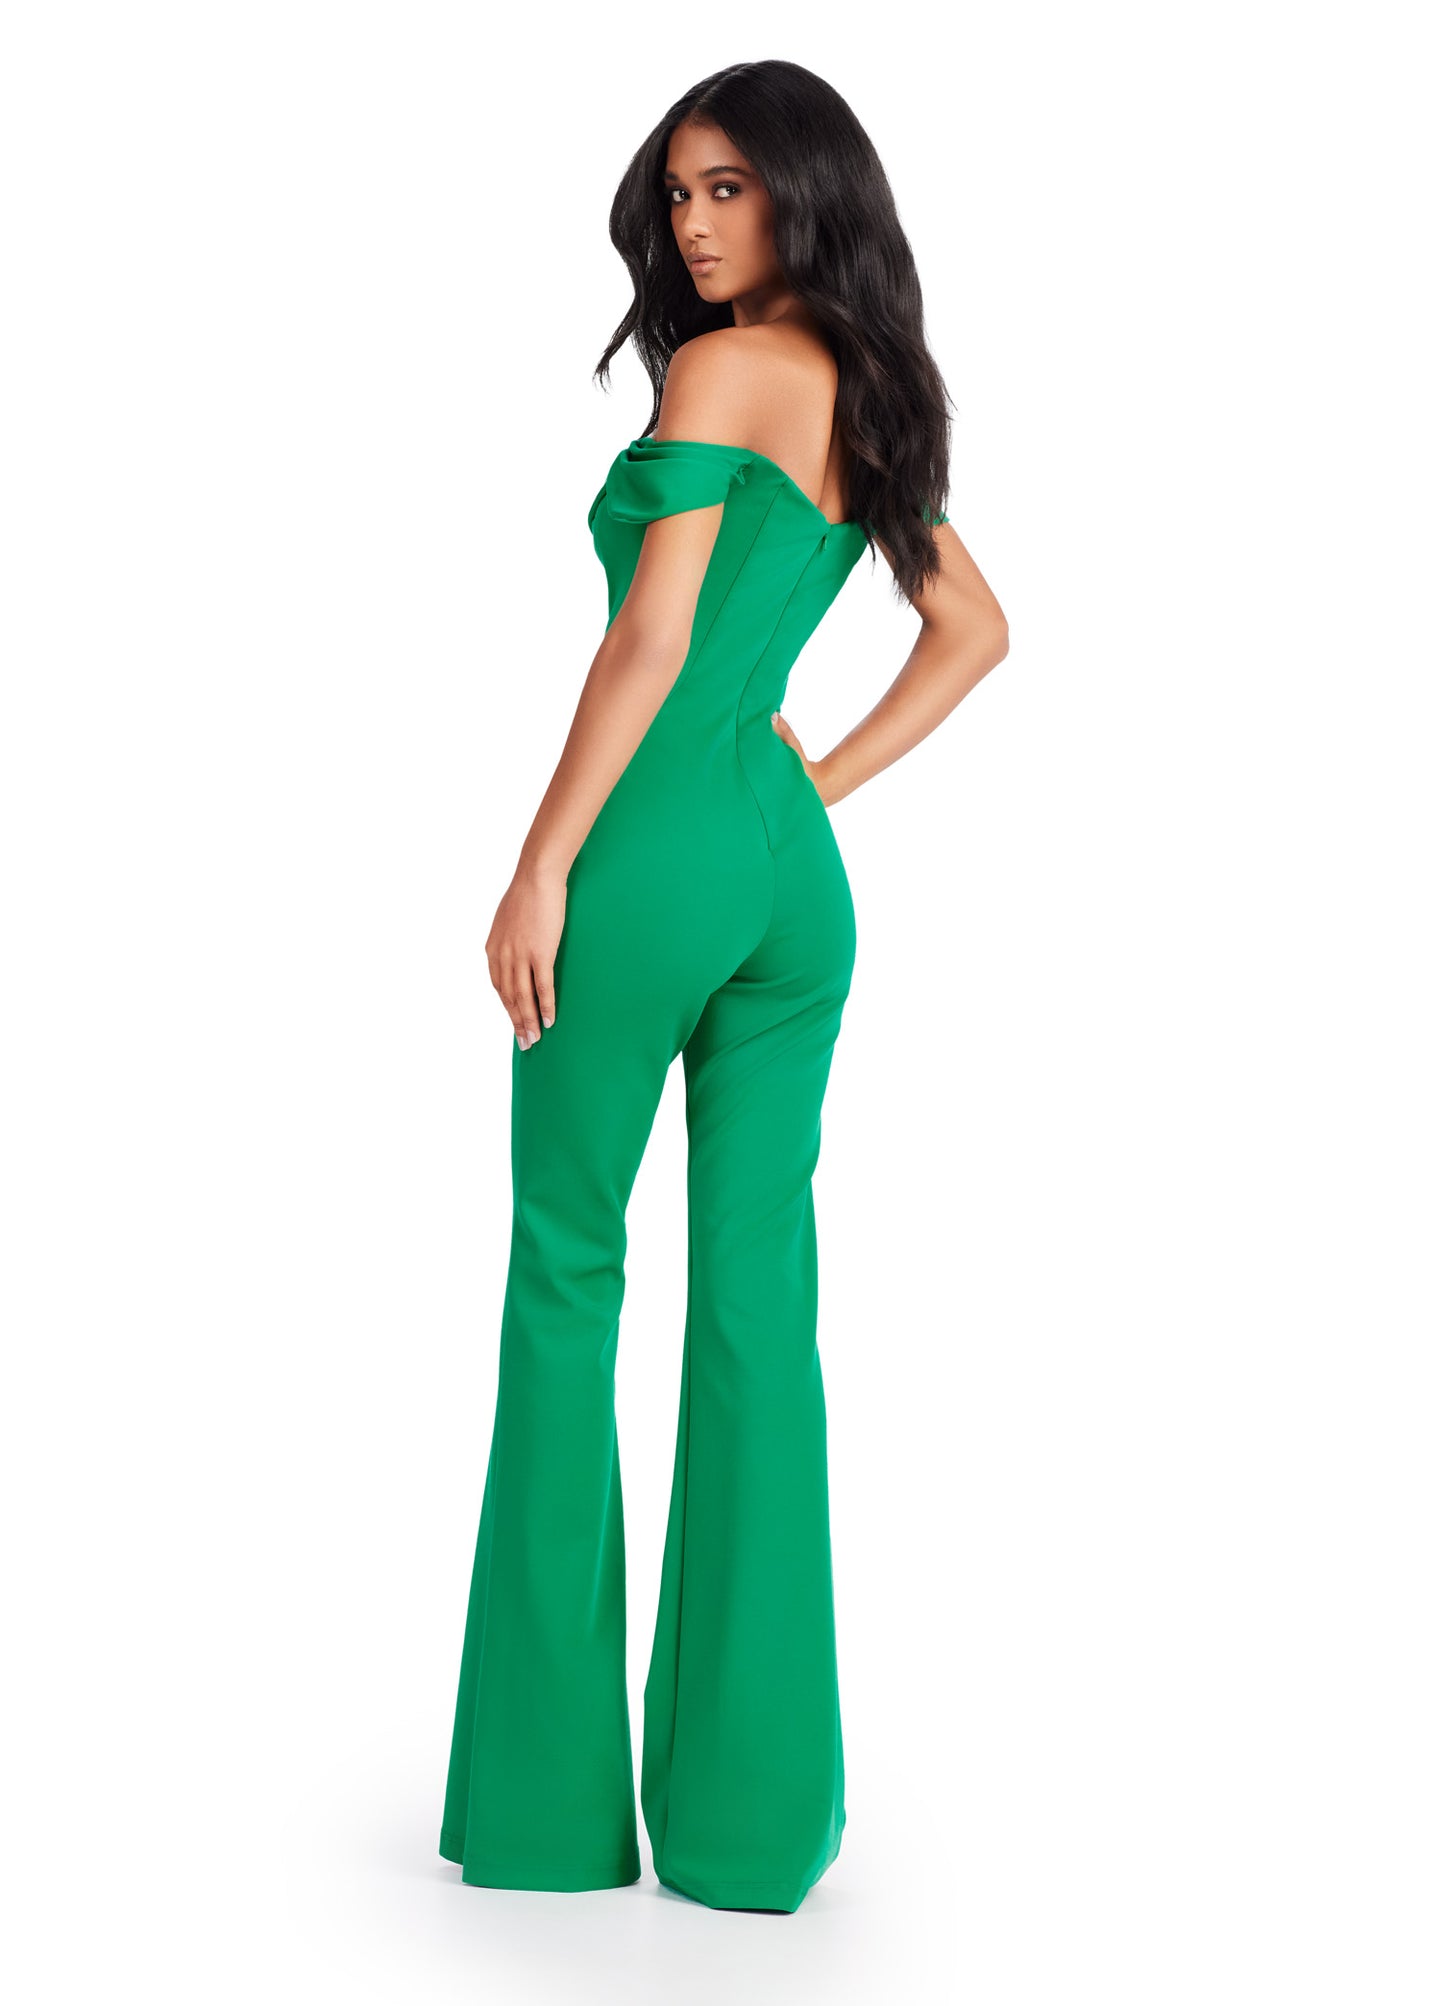 Elevate your formal wear game with the Ashley Lauren 11532 Prom Off Shoulder Scuba Jumpsuit. Featuring an off shoulder design, this jumpsuit adds a touch of sophistication to your prom look. Made with high-quality scuba material, it offers a comfortable fit for a night of dancing and fun. Perfect for making a statement on the dance floor. This off the shoulder scuba jumpsuit features elegant bustier draping that flows along the off shoulder straps.